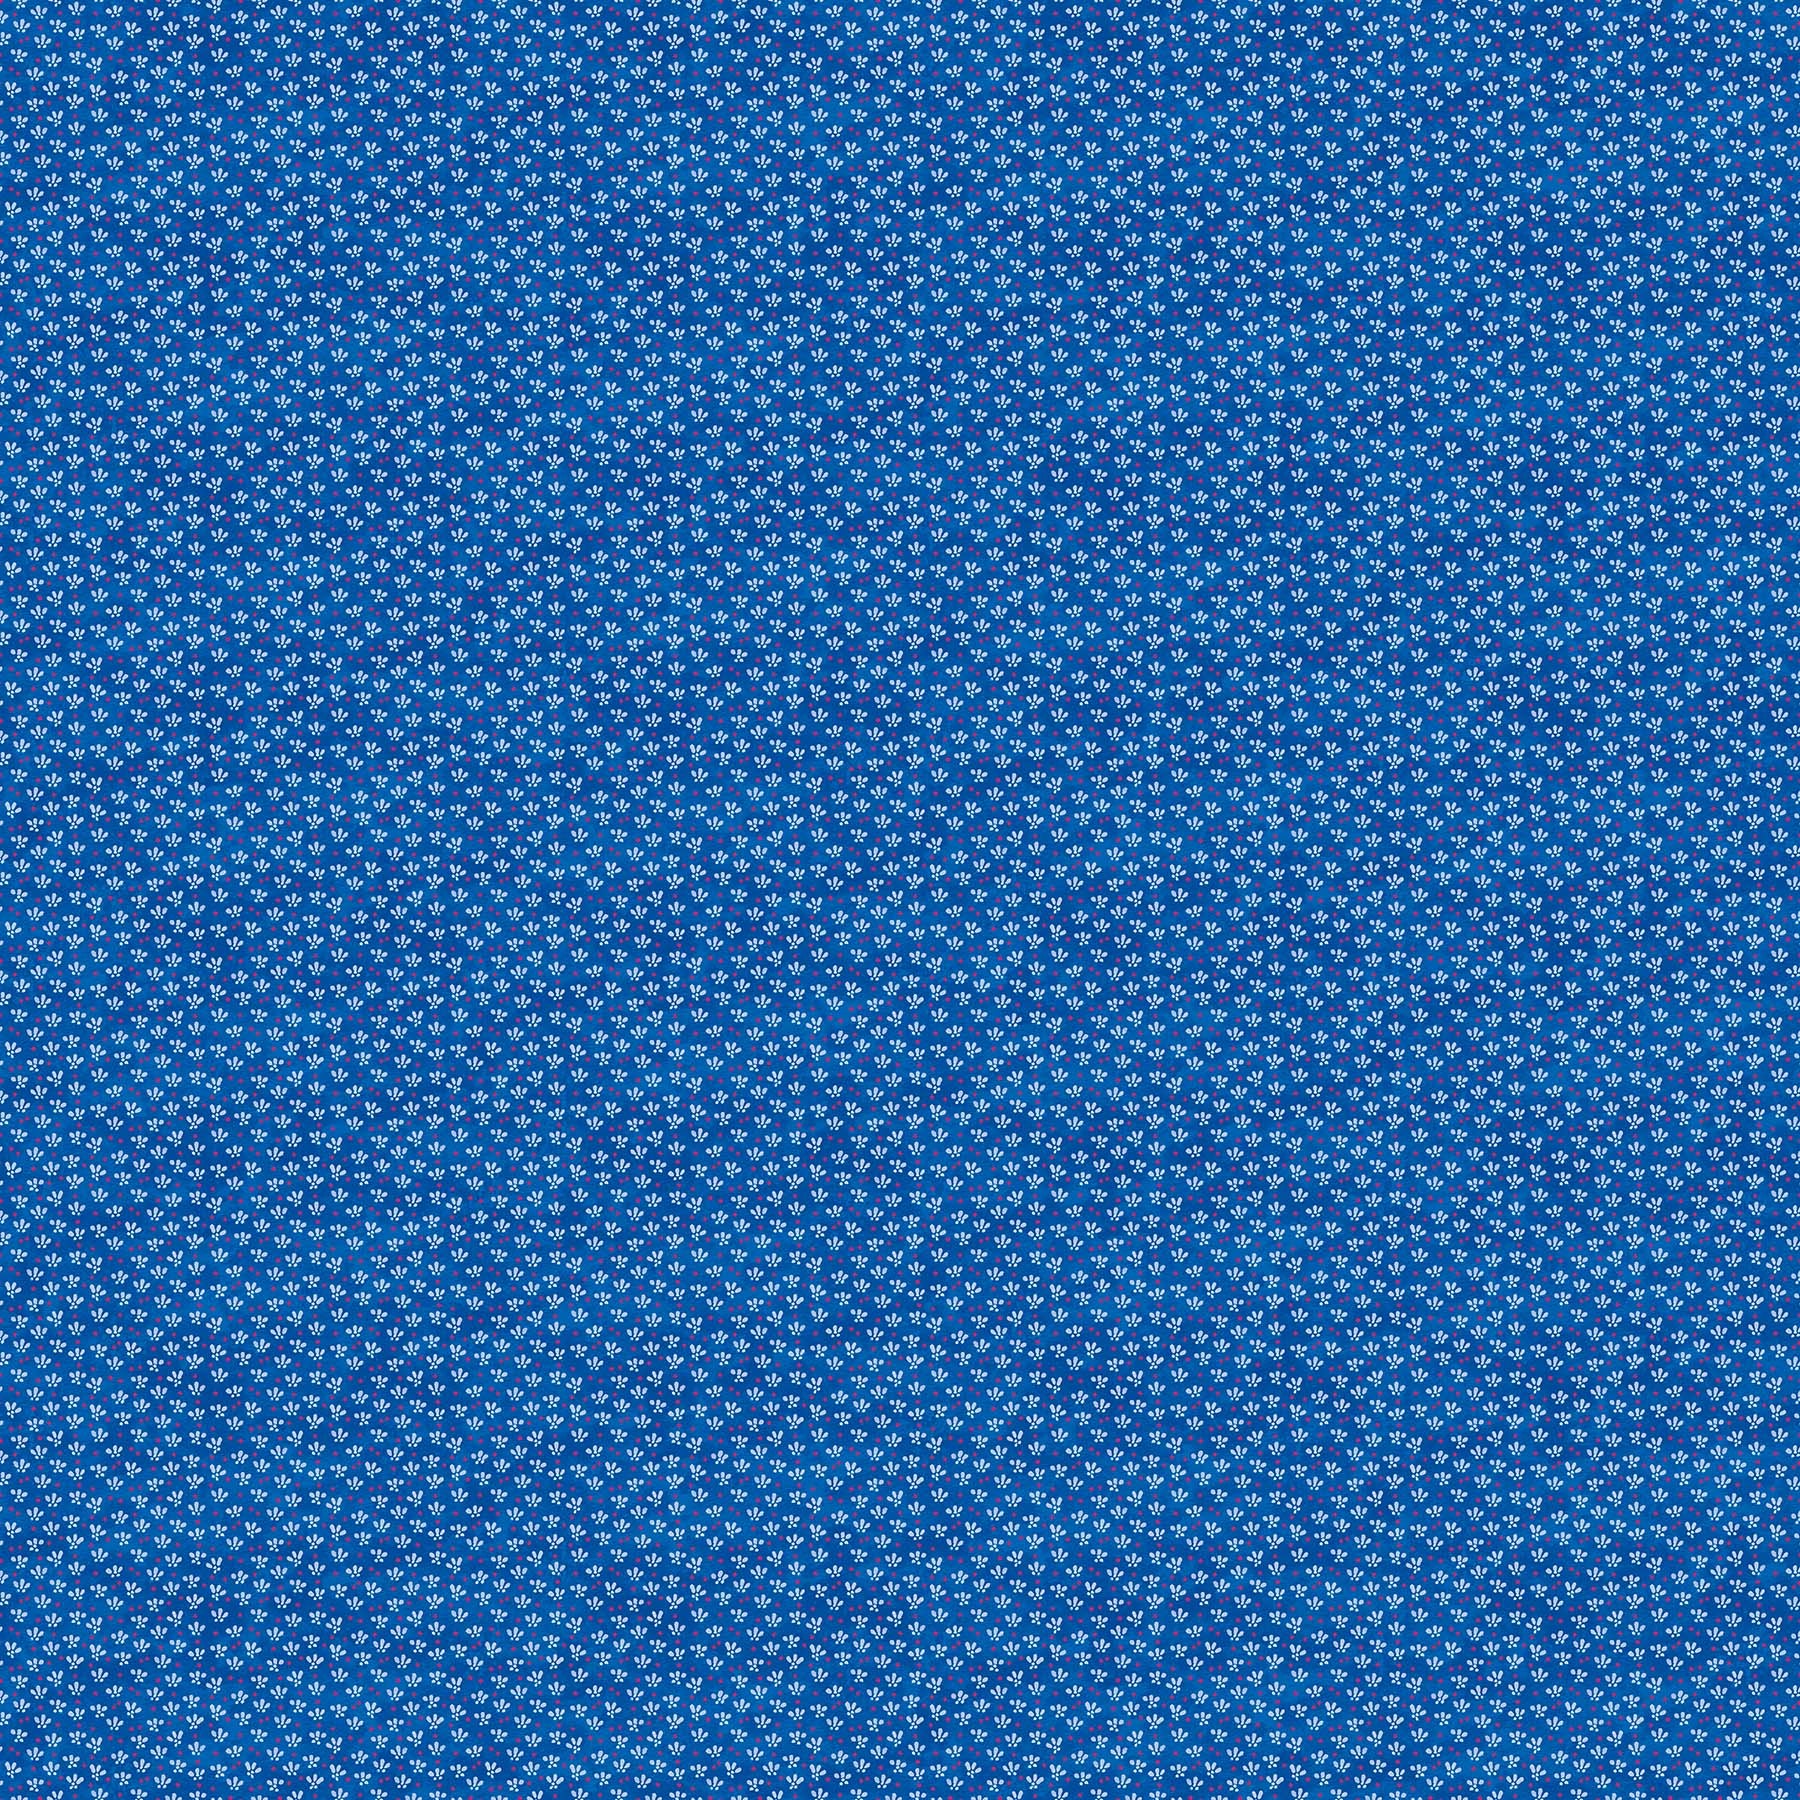 Fabric, Quilts and Kuspuks Blue 25209-46